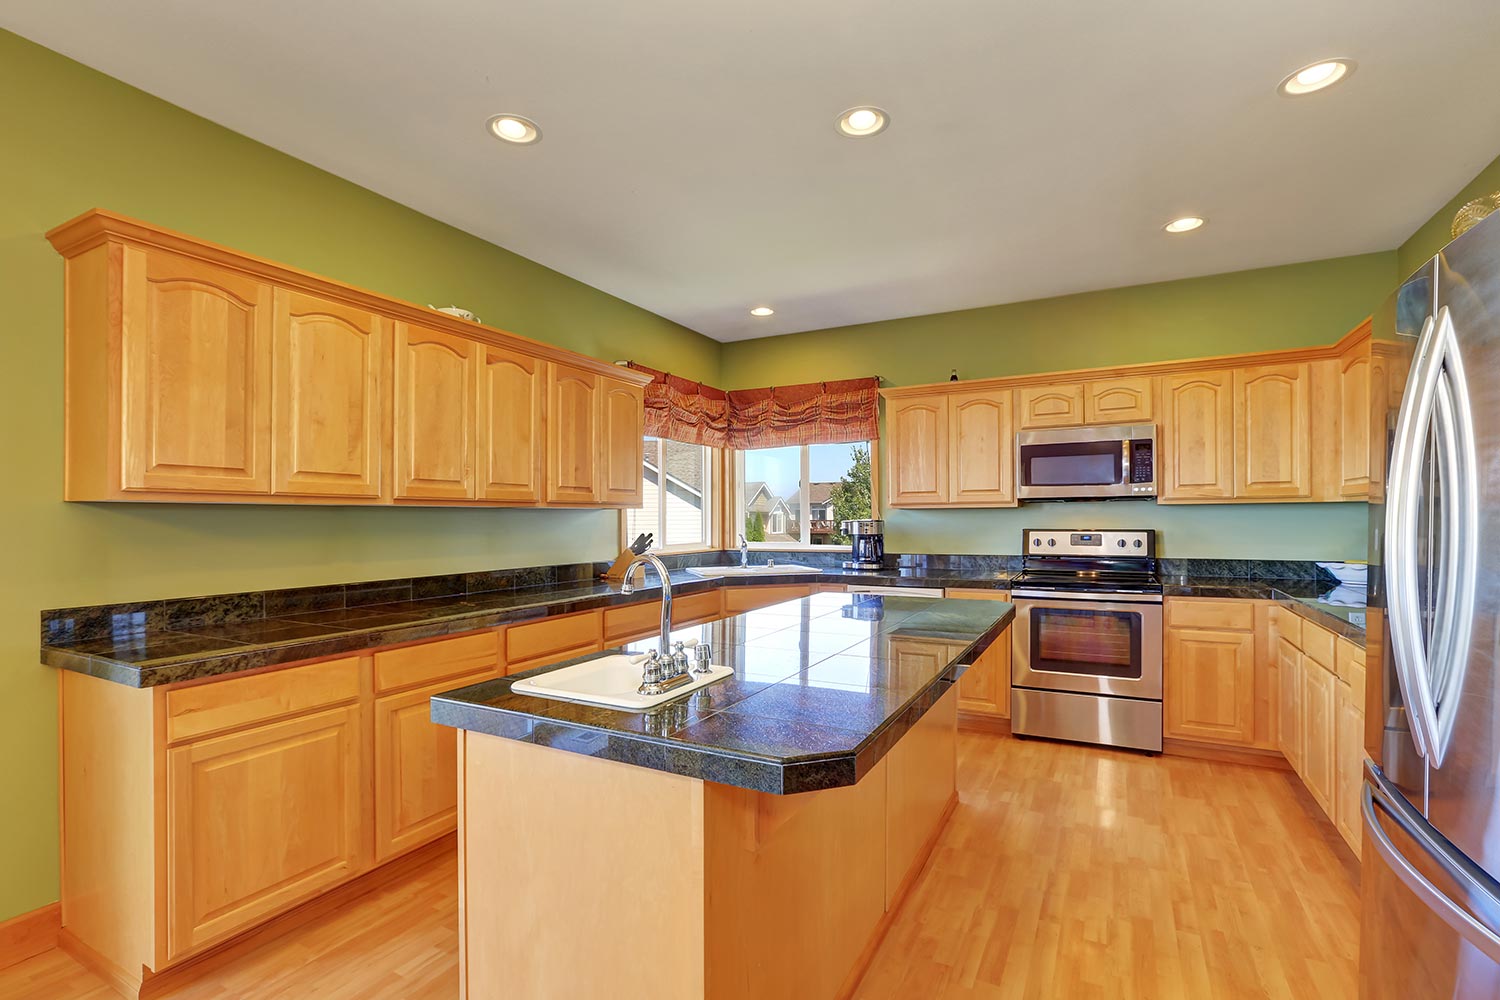 Spacious kitchen with green walls, hardwood floor and maple cabinet